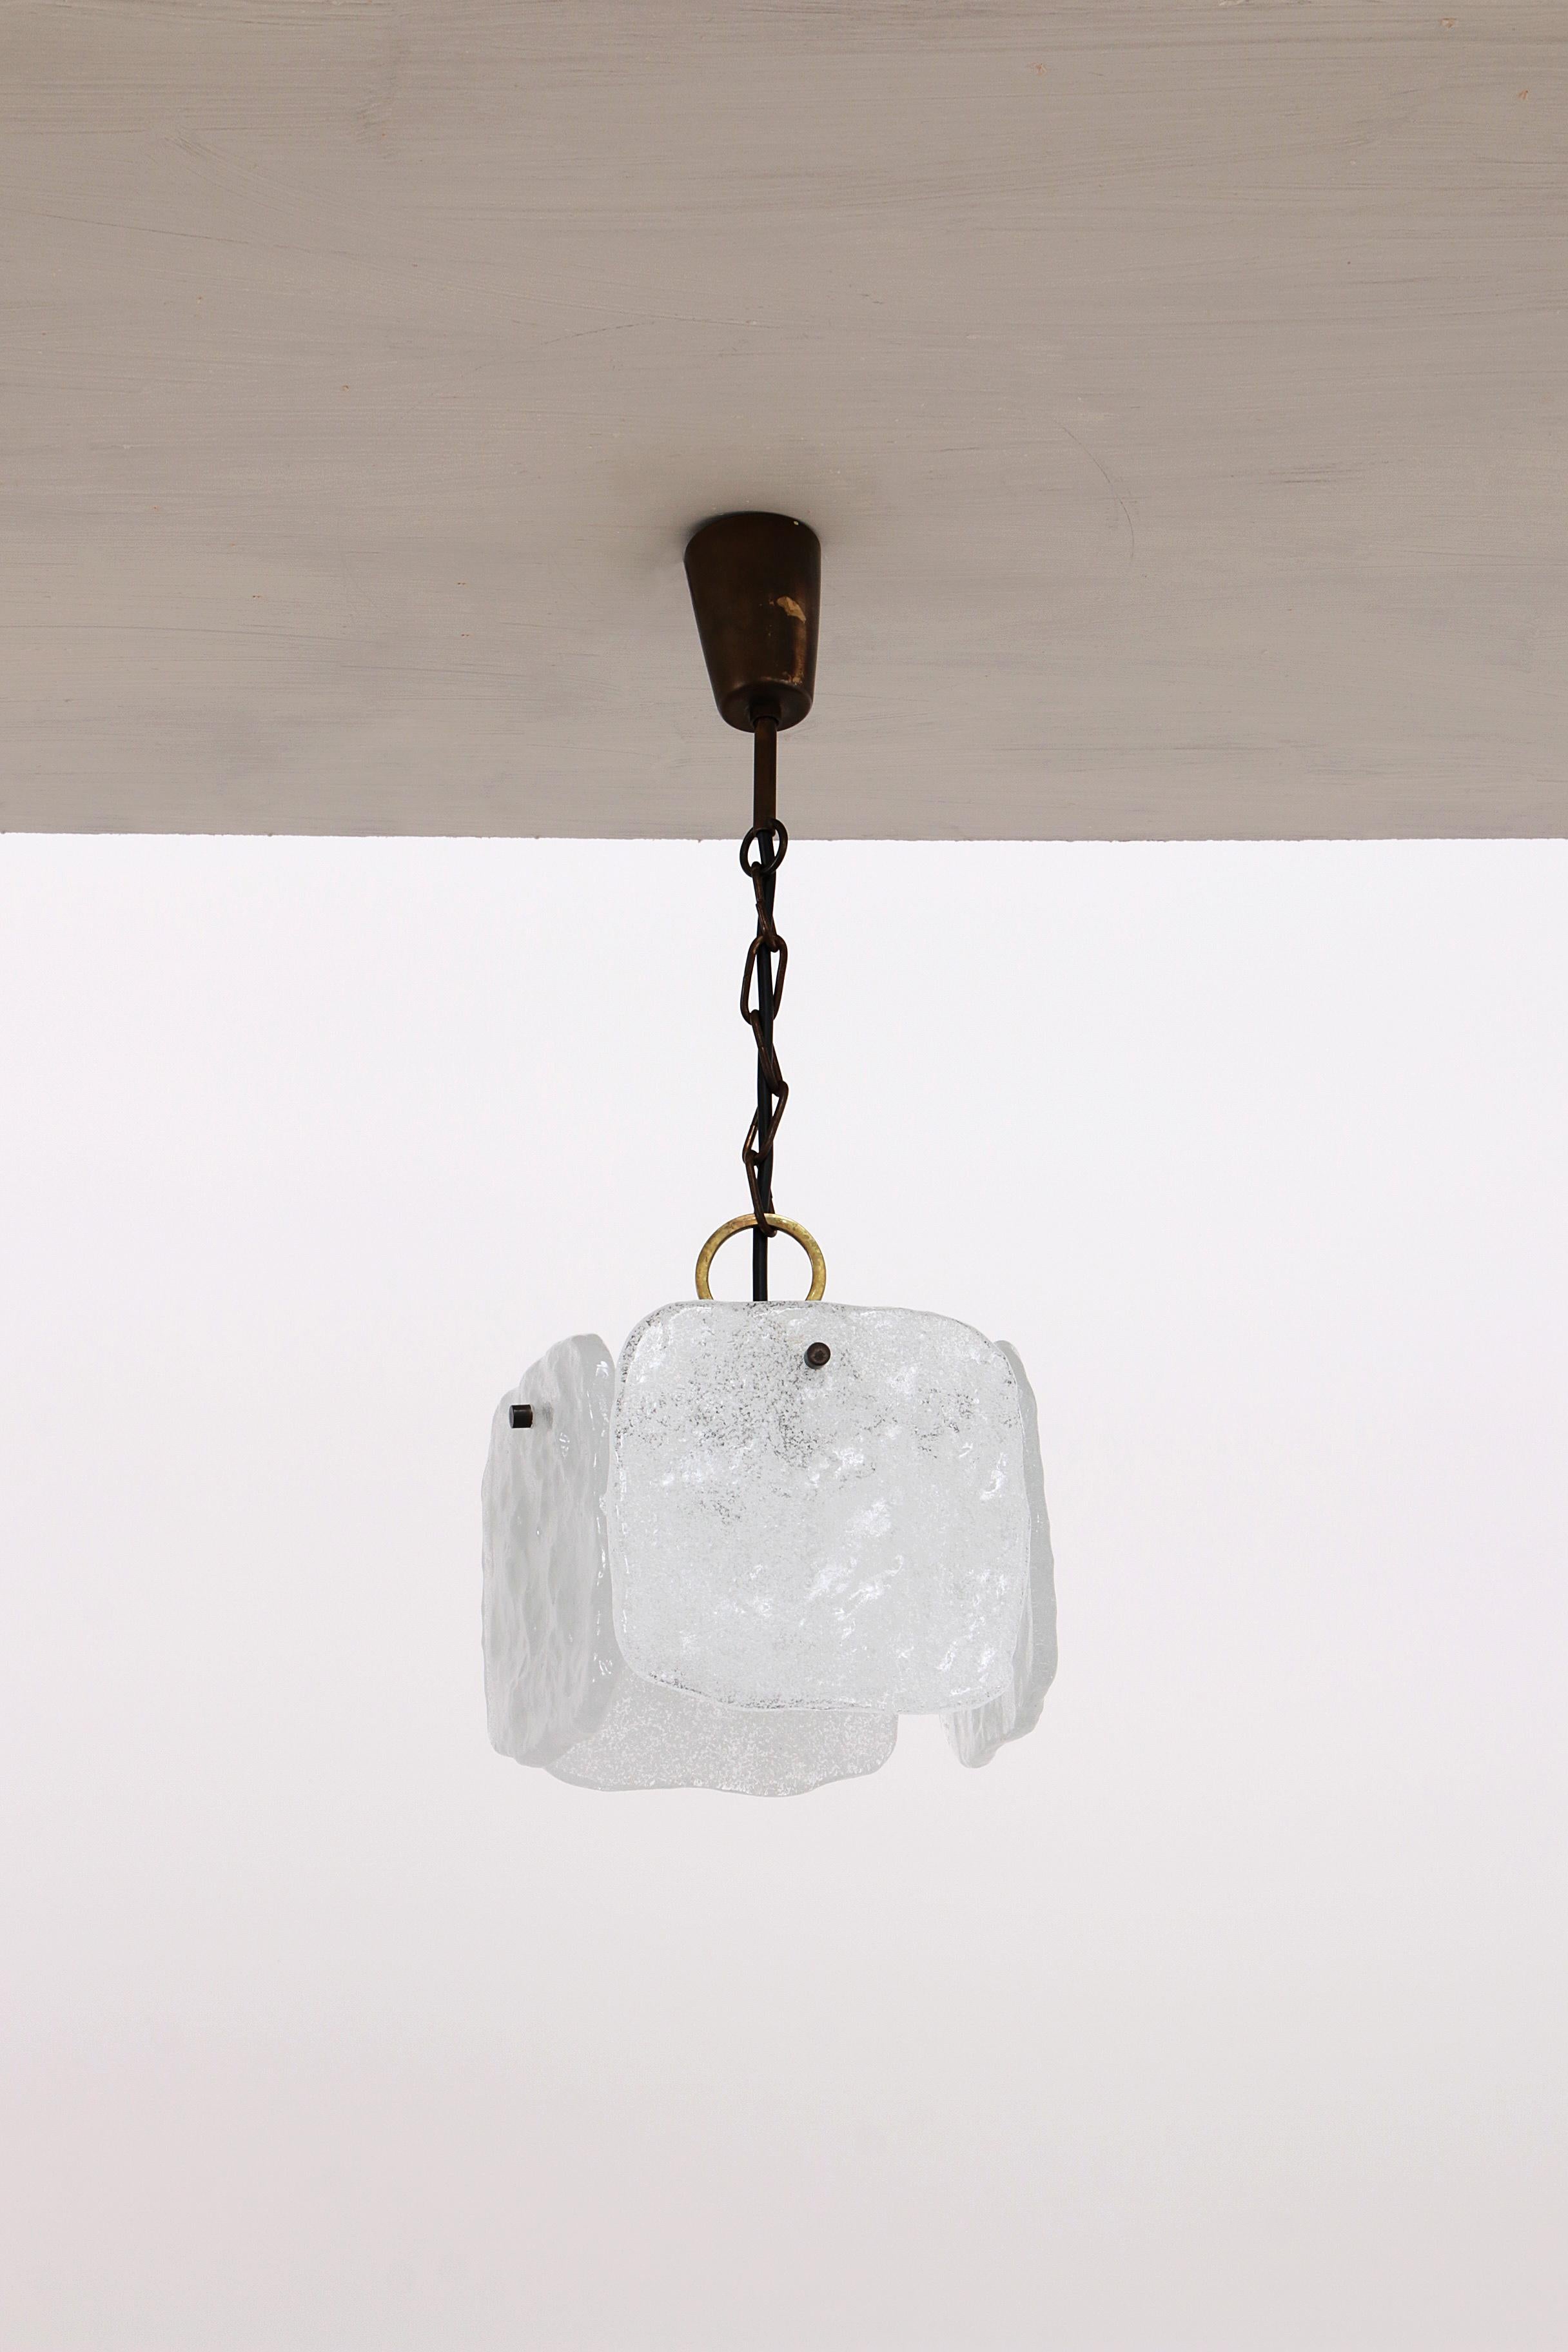 J.T Kalmar hanging lamp Pulegoso Foam glass, 1960

Heavy quality vintage hanging lamp made in the 1960s by Kalmar Franken. This Austrian family business has been producing high-quality luxury lamps since 1881.

This vintage piece has four glass